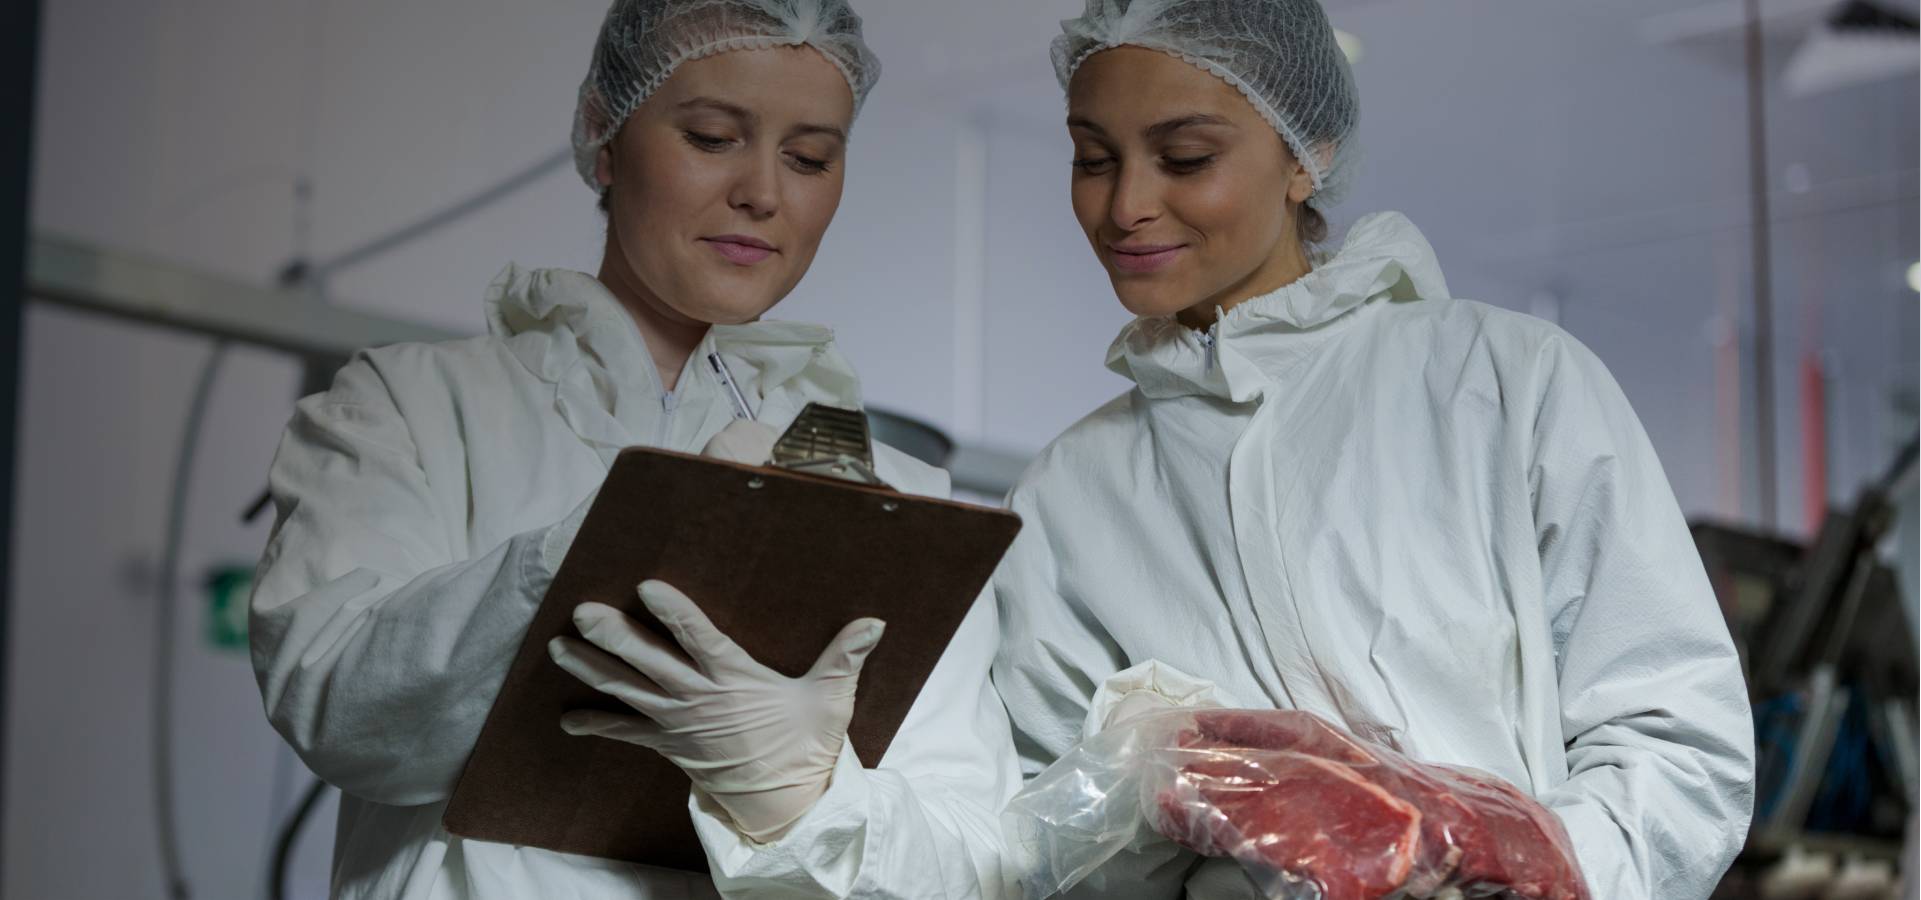 The growing customer and consumer need for traceability across different stages of meat